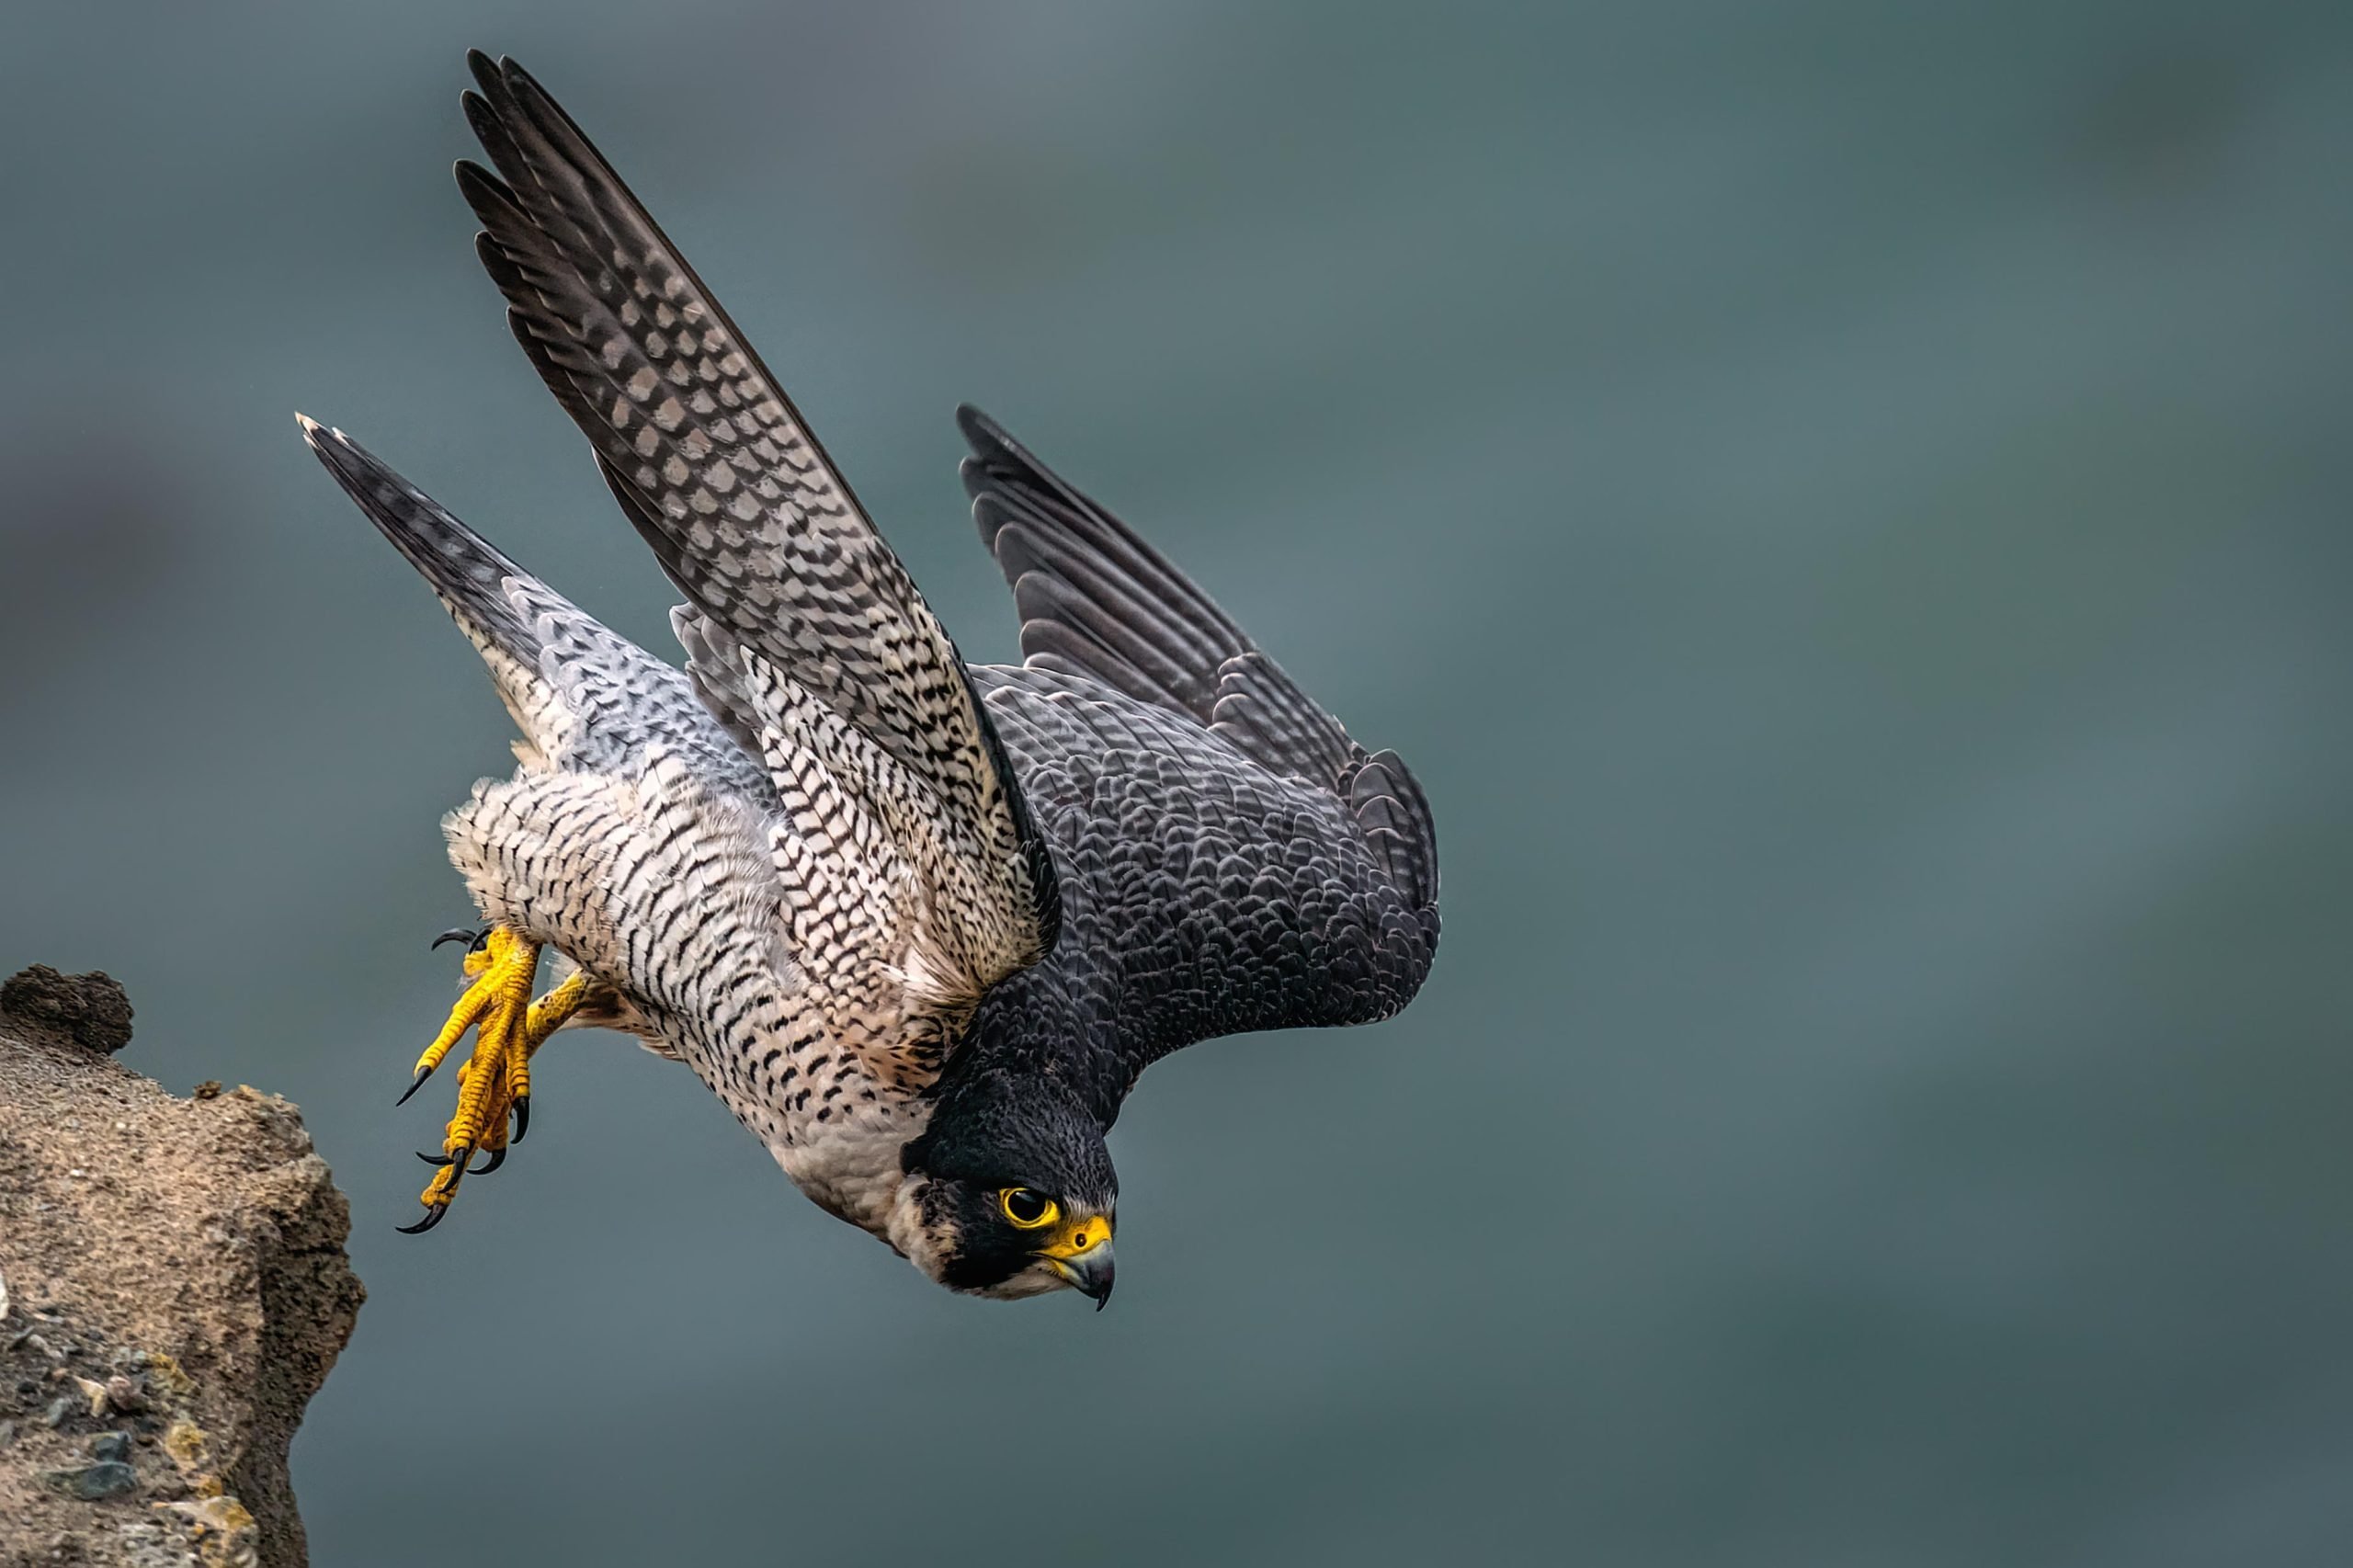 The Peregrine Falcon Is the World's Fastest Animal